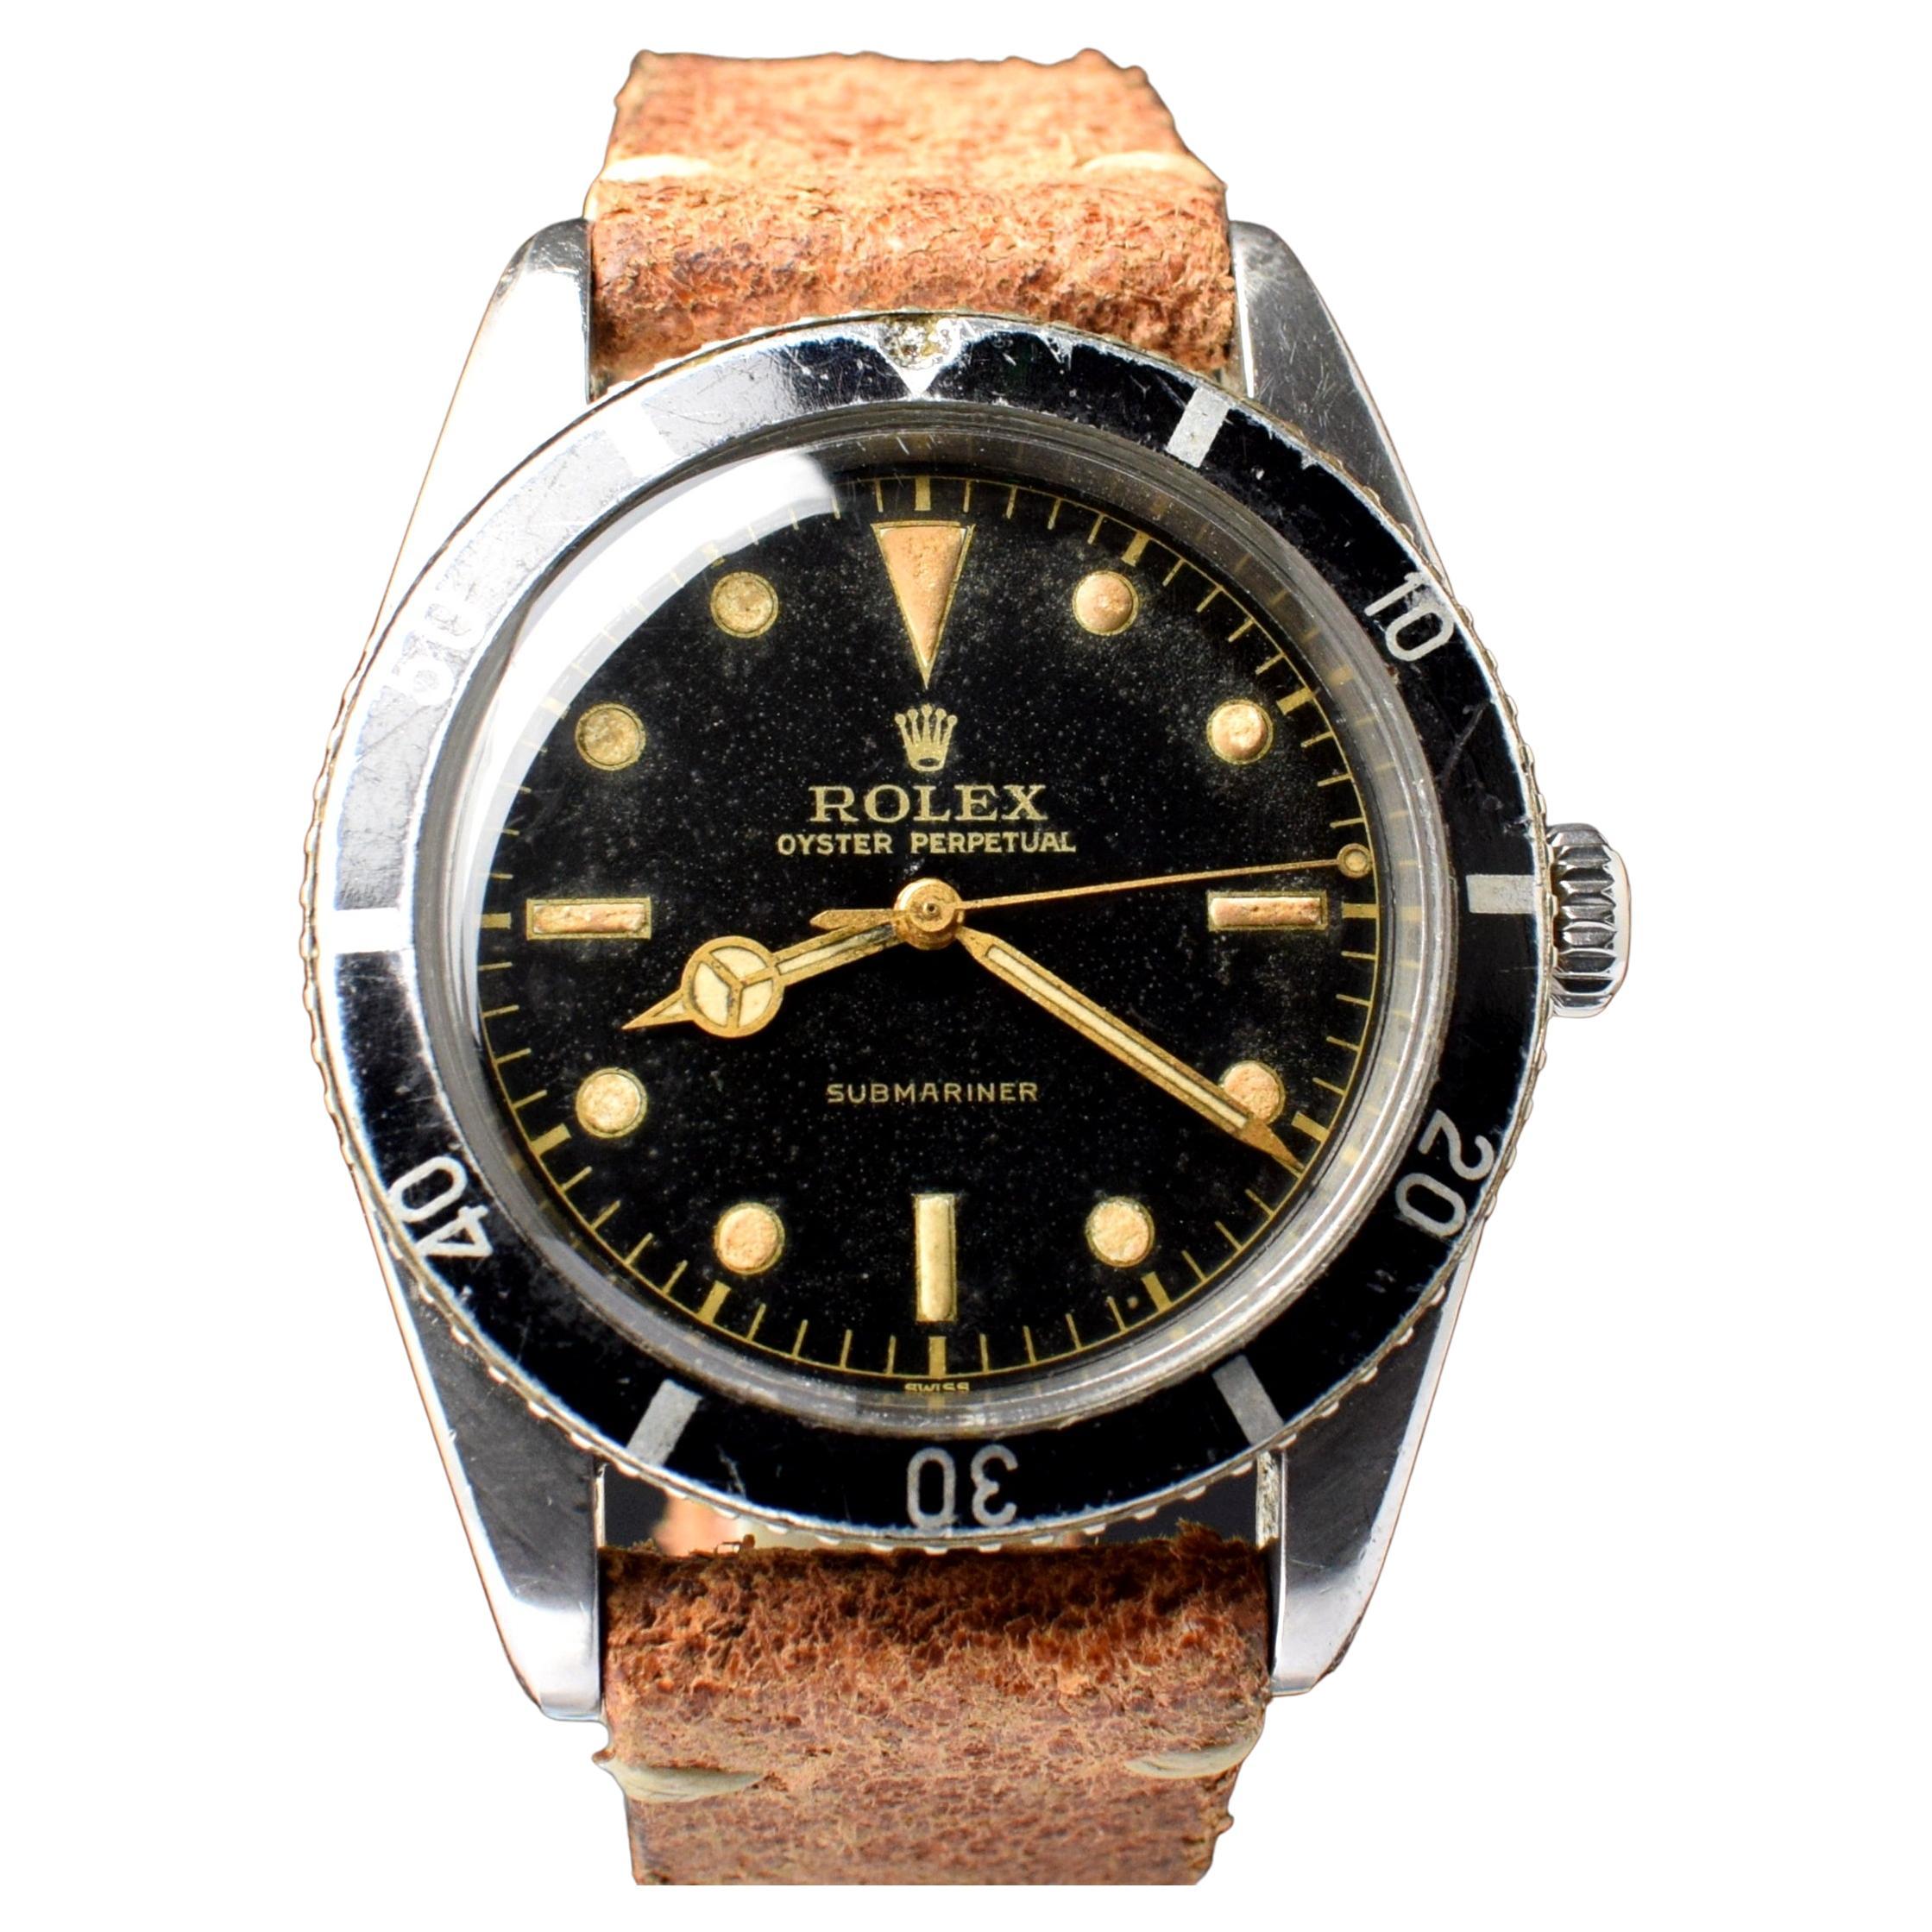 Rolex Submariner Small Crown Gilt Black Dial 6205 Steel Automatic Watch 1954 For Sale